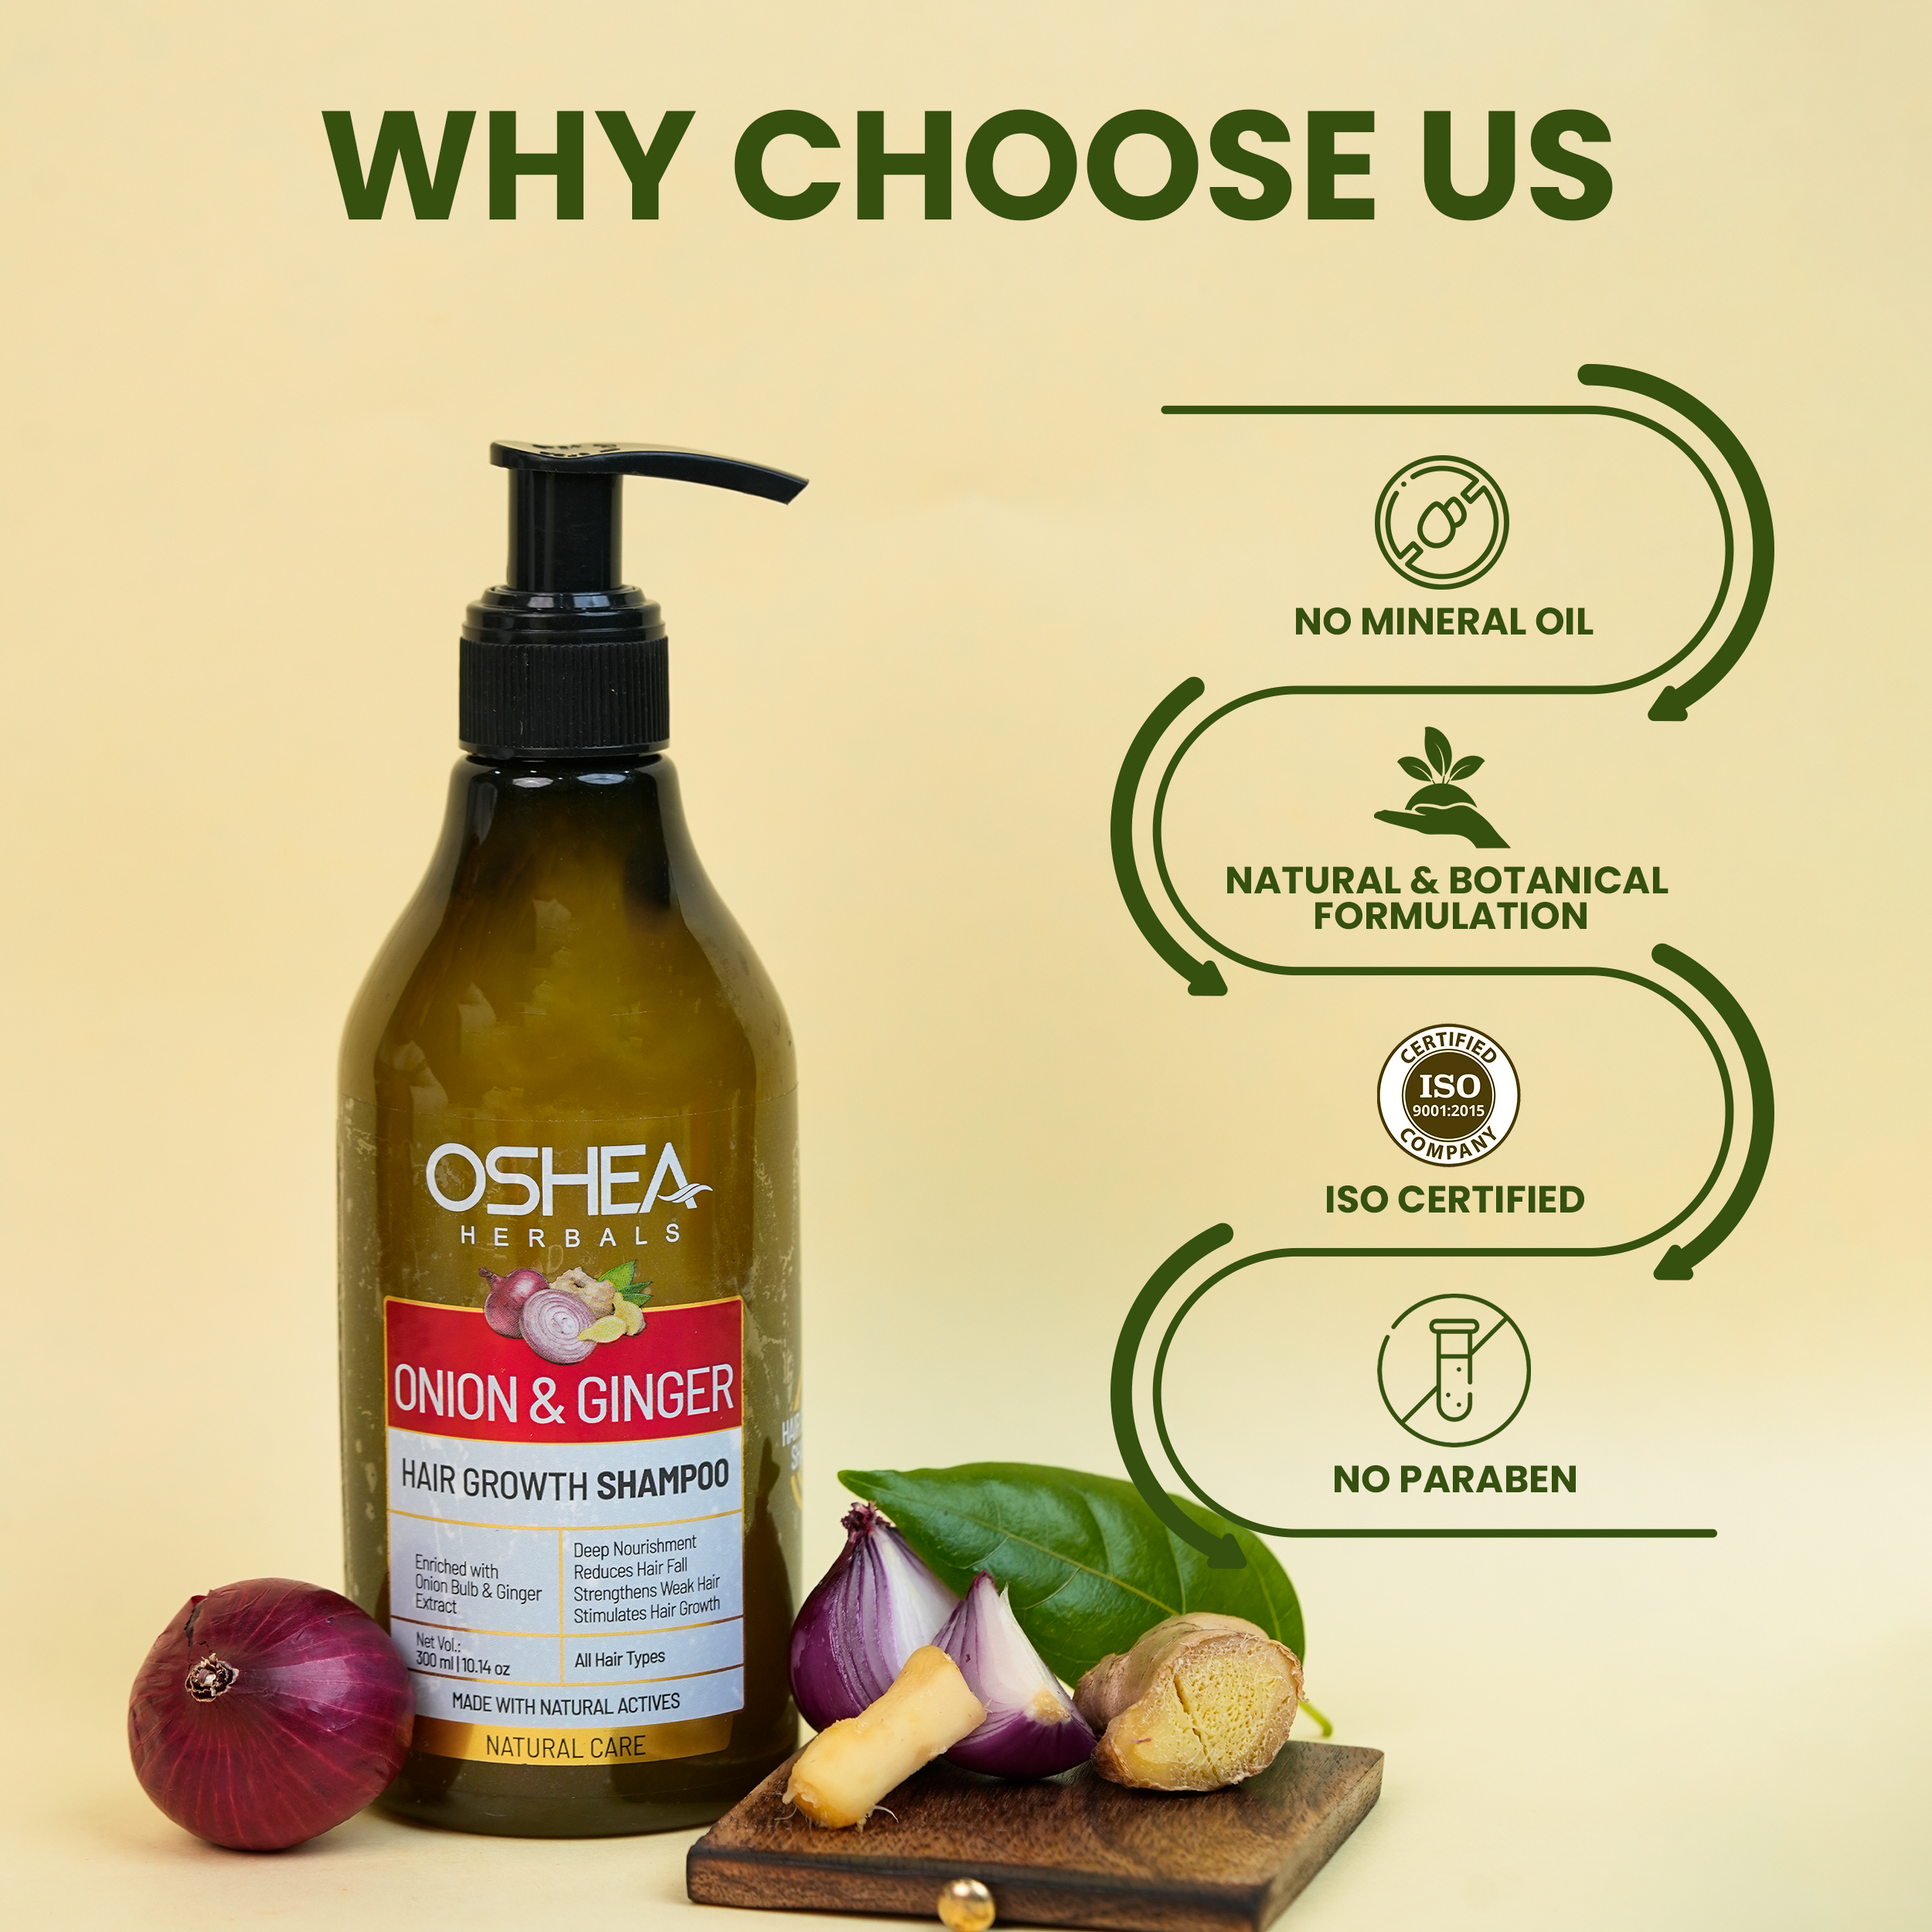 Why Choose Us Onion And Ginger Hair Growth Shampoo Oshea Herbals